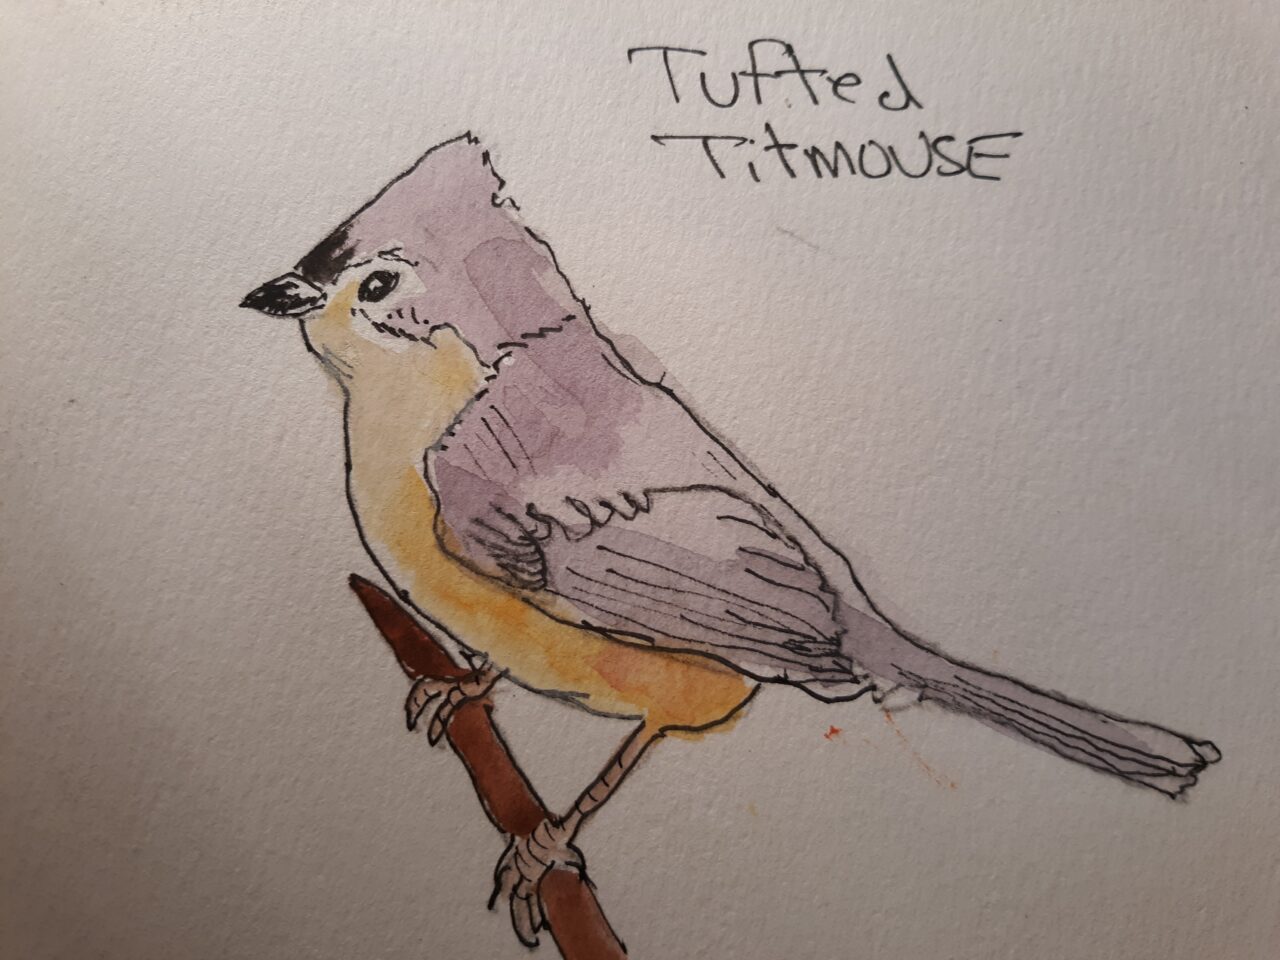 Tufted Titmouse by Hank Lawrence